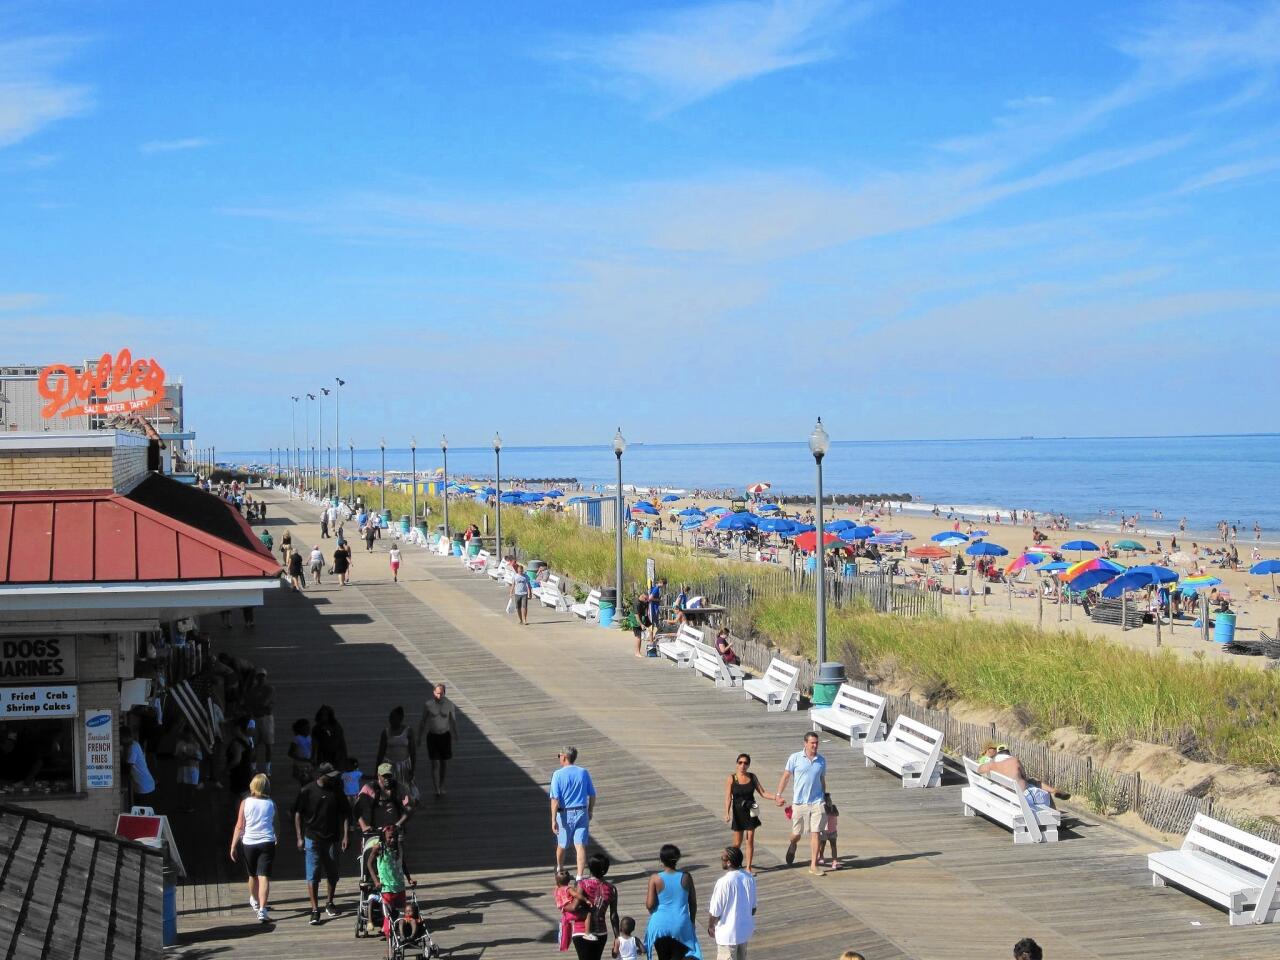 Travel+Leisure calls Rehoboth Beach “one of America's best beach towns.” Spend the day on the beach, get caramel corn at Dolles, a tradition since 1927, and stroll along the mile-long boardwalk. rehobothboardwalk.com